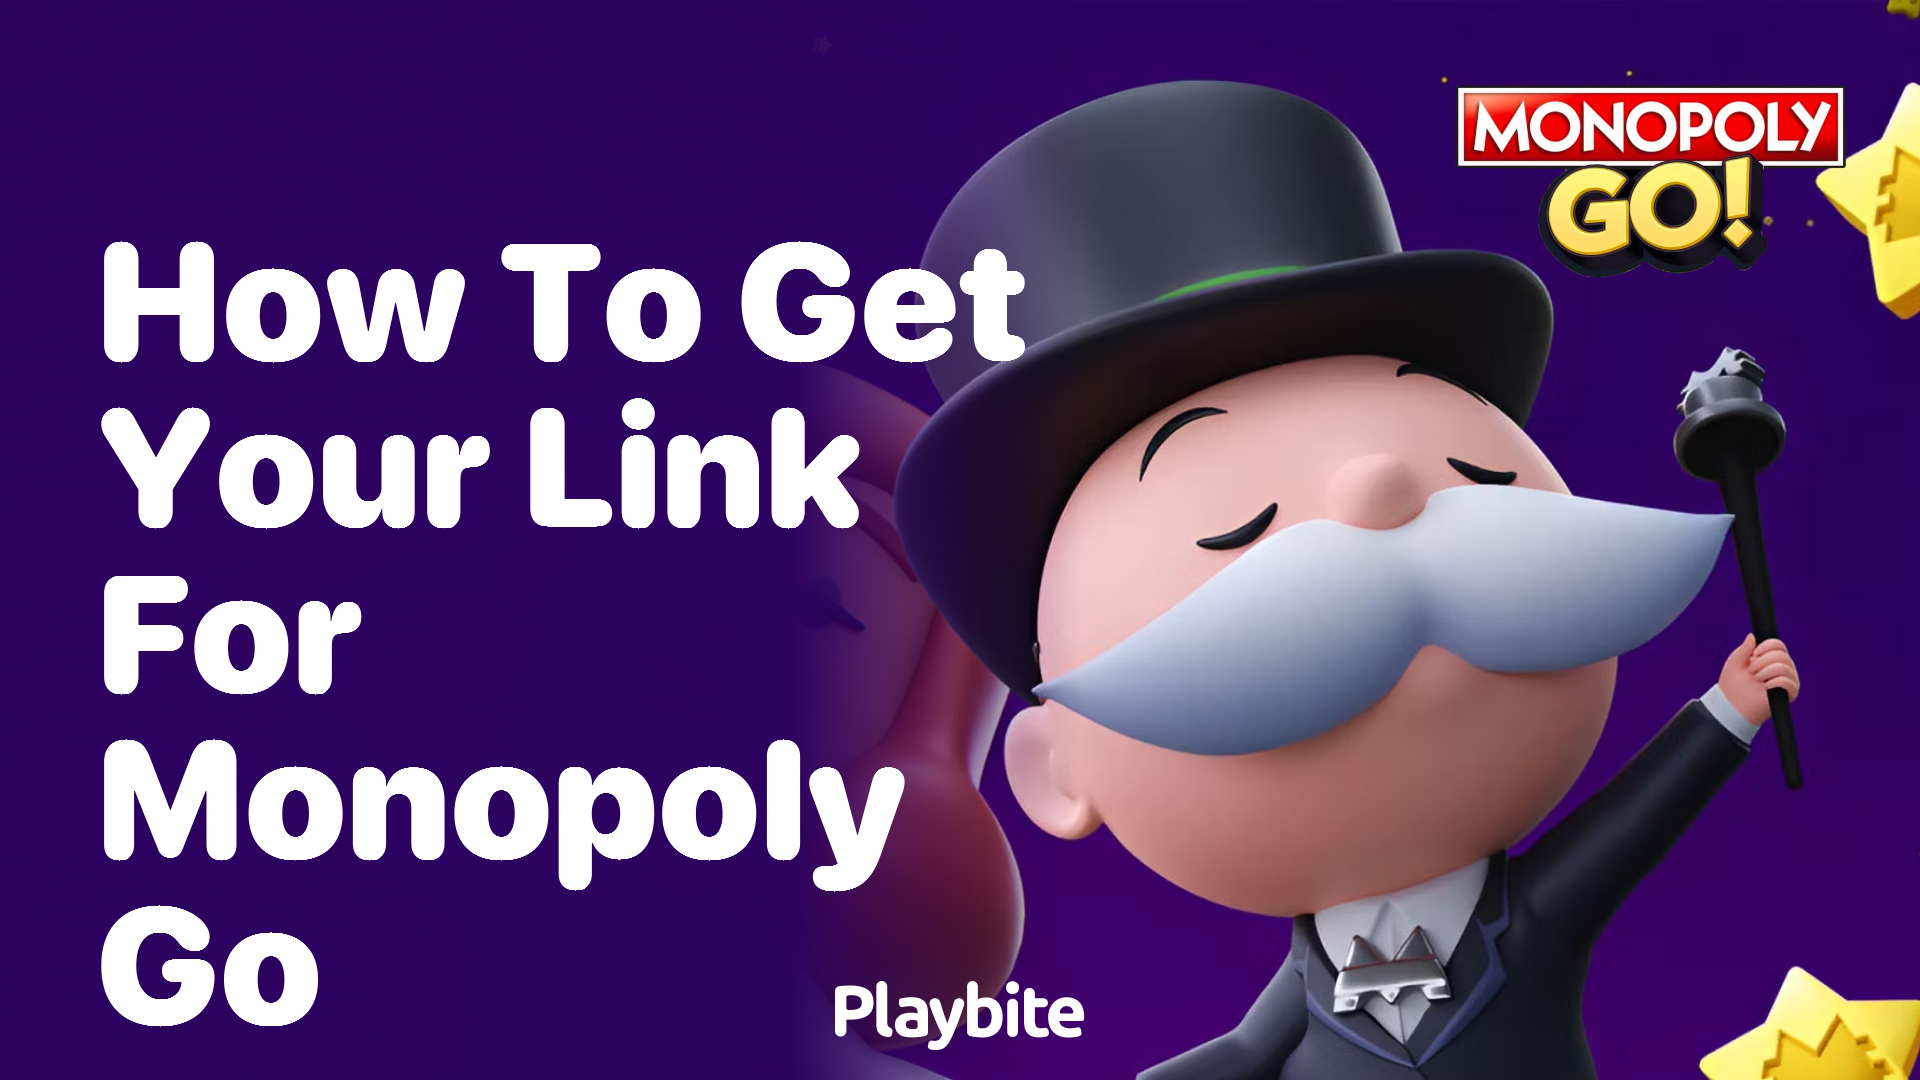 How to Get Your Link for Monopoly Go